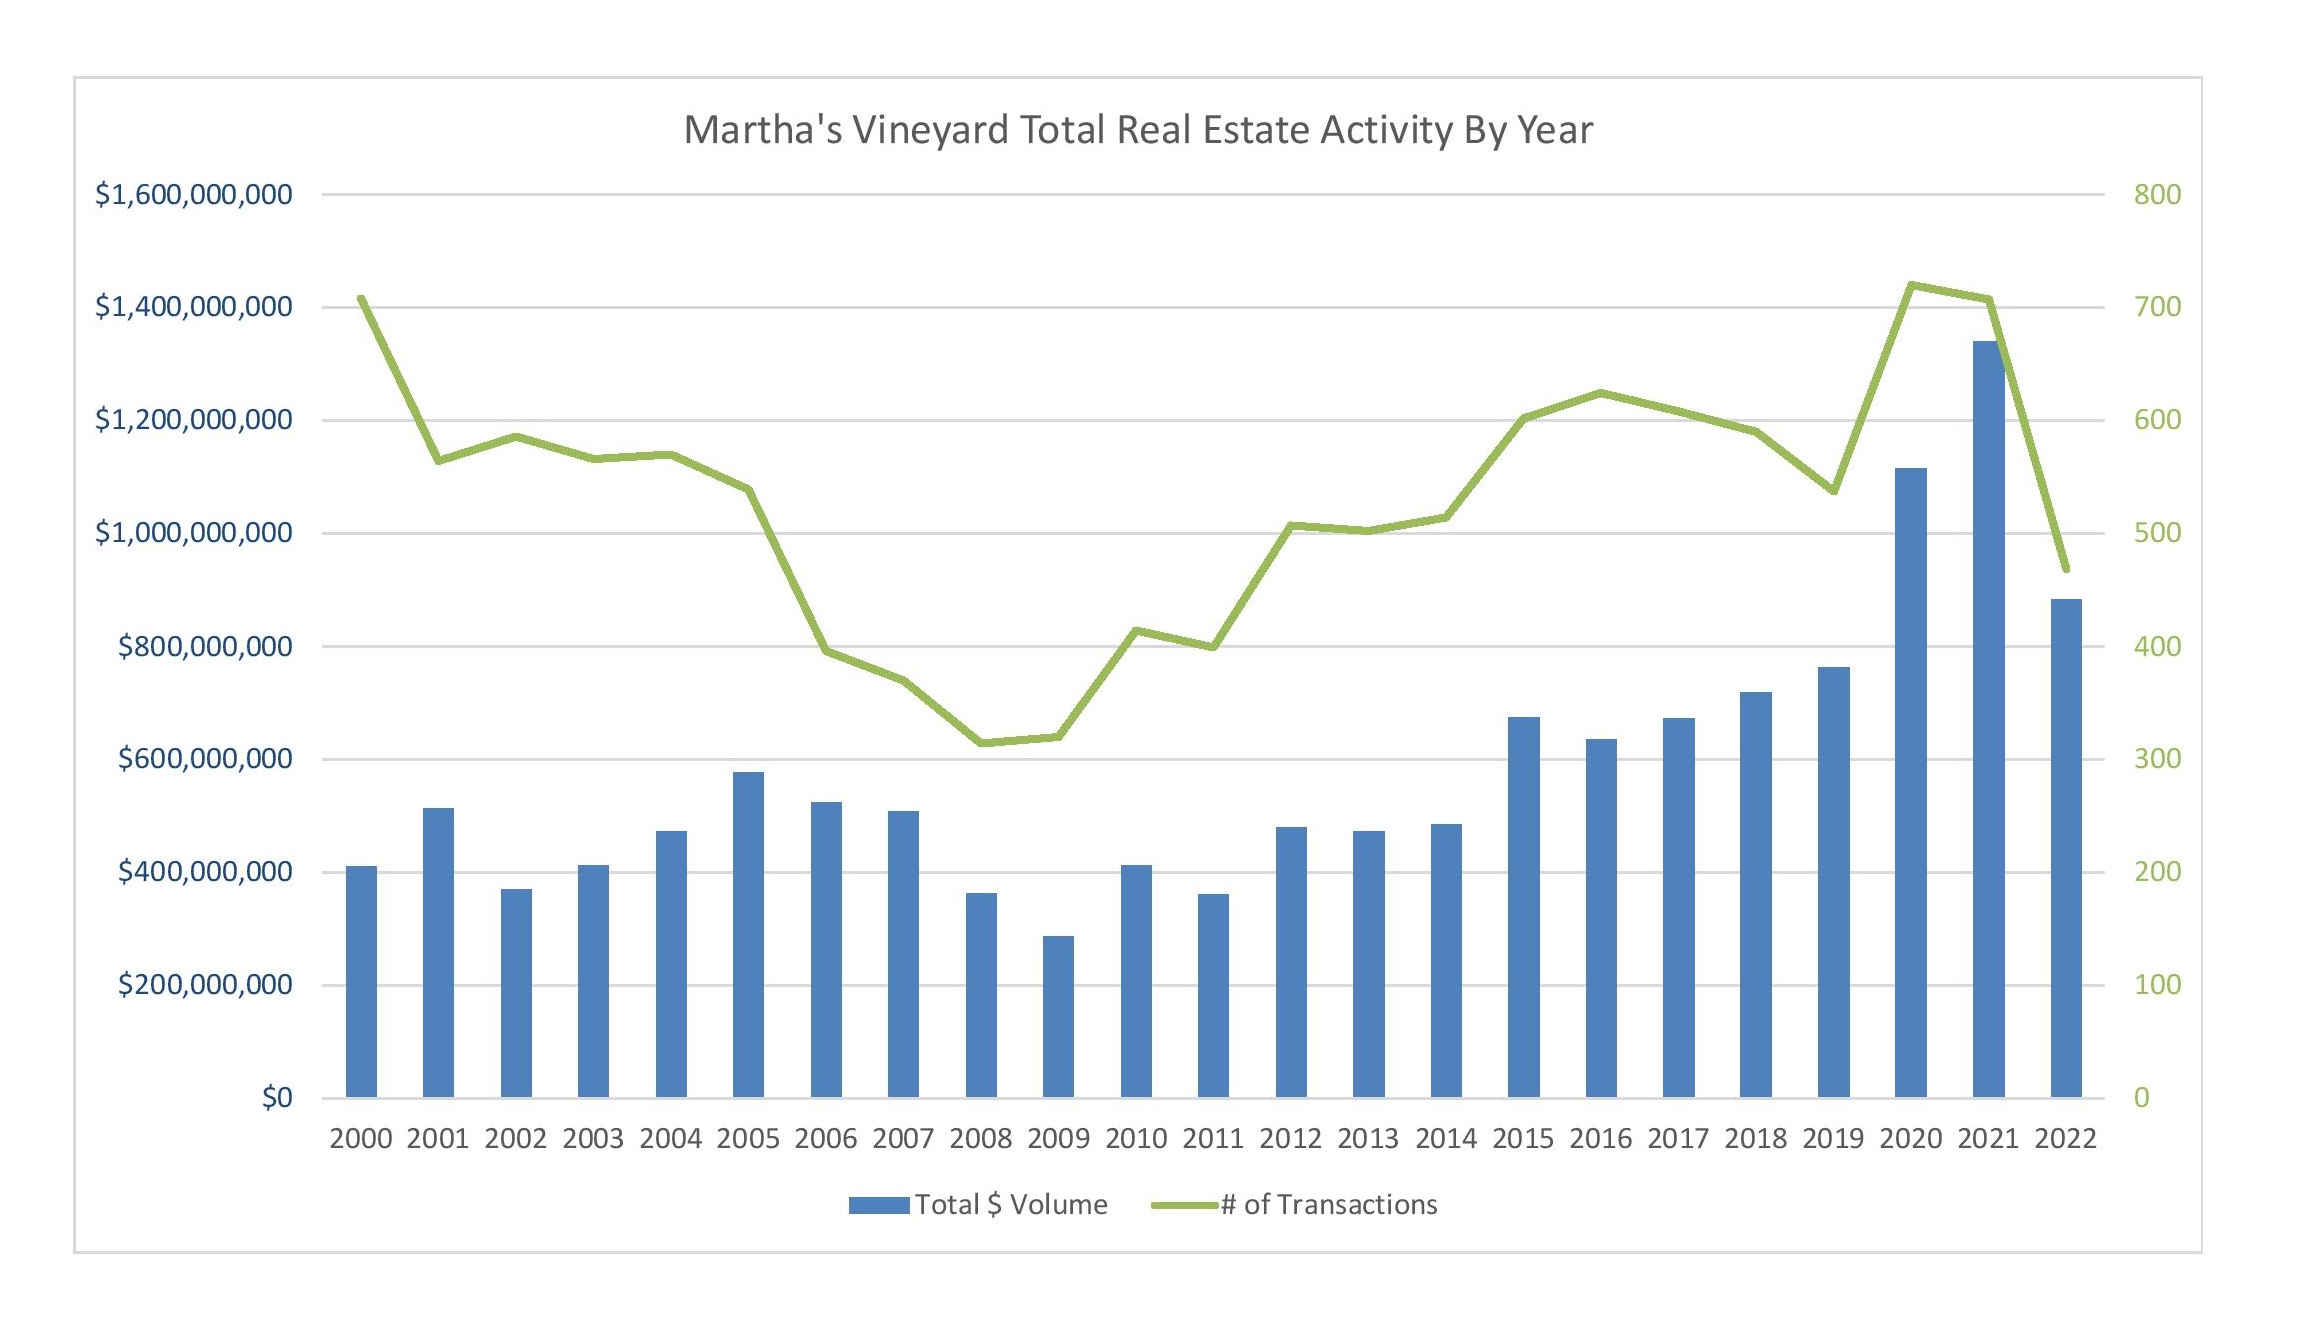 Transactions and Dollar Volume 2022